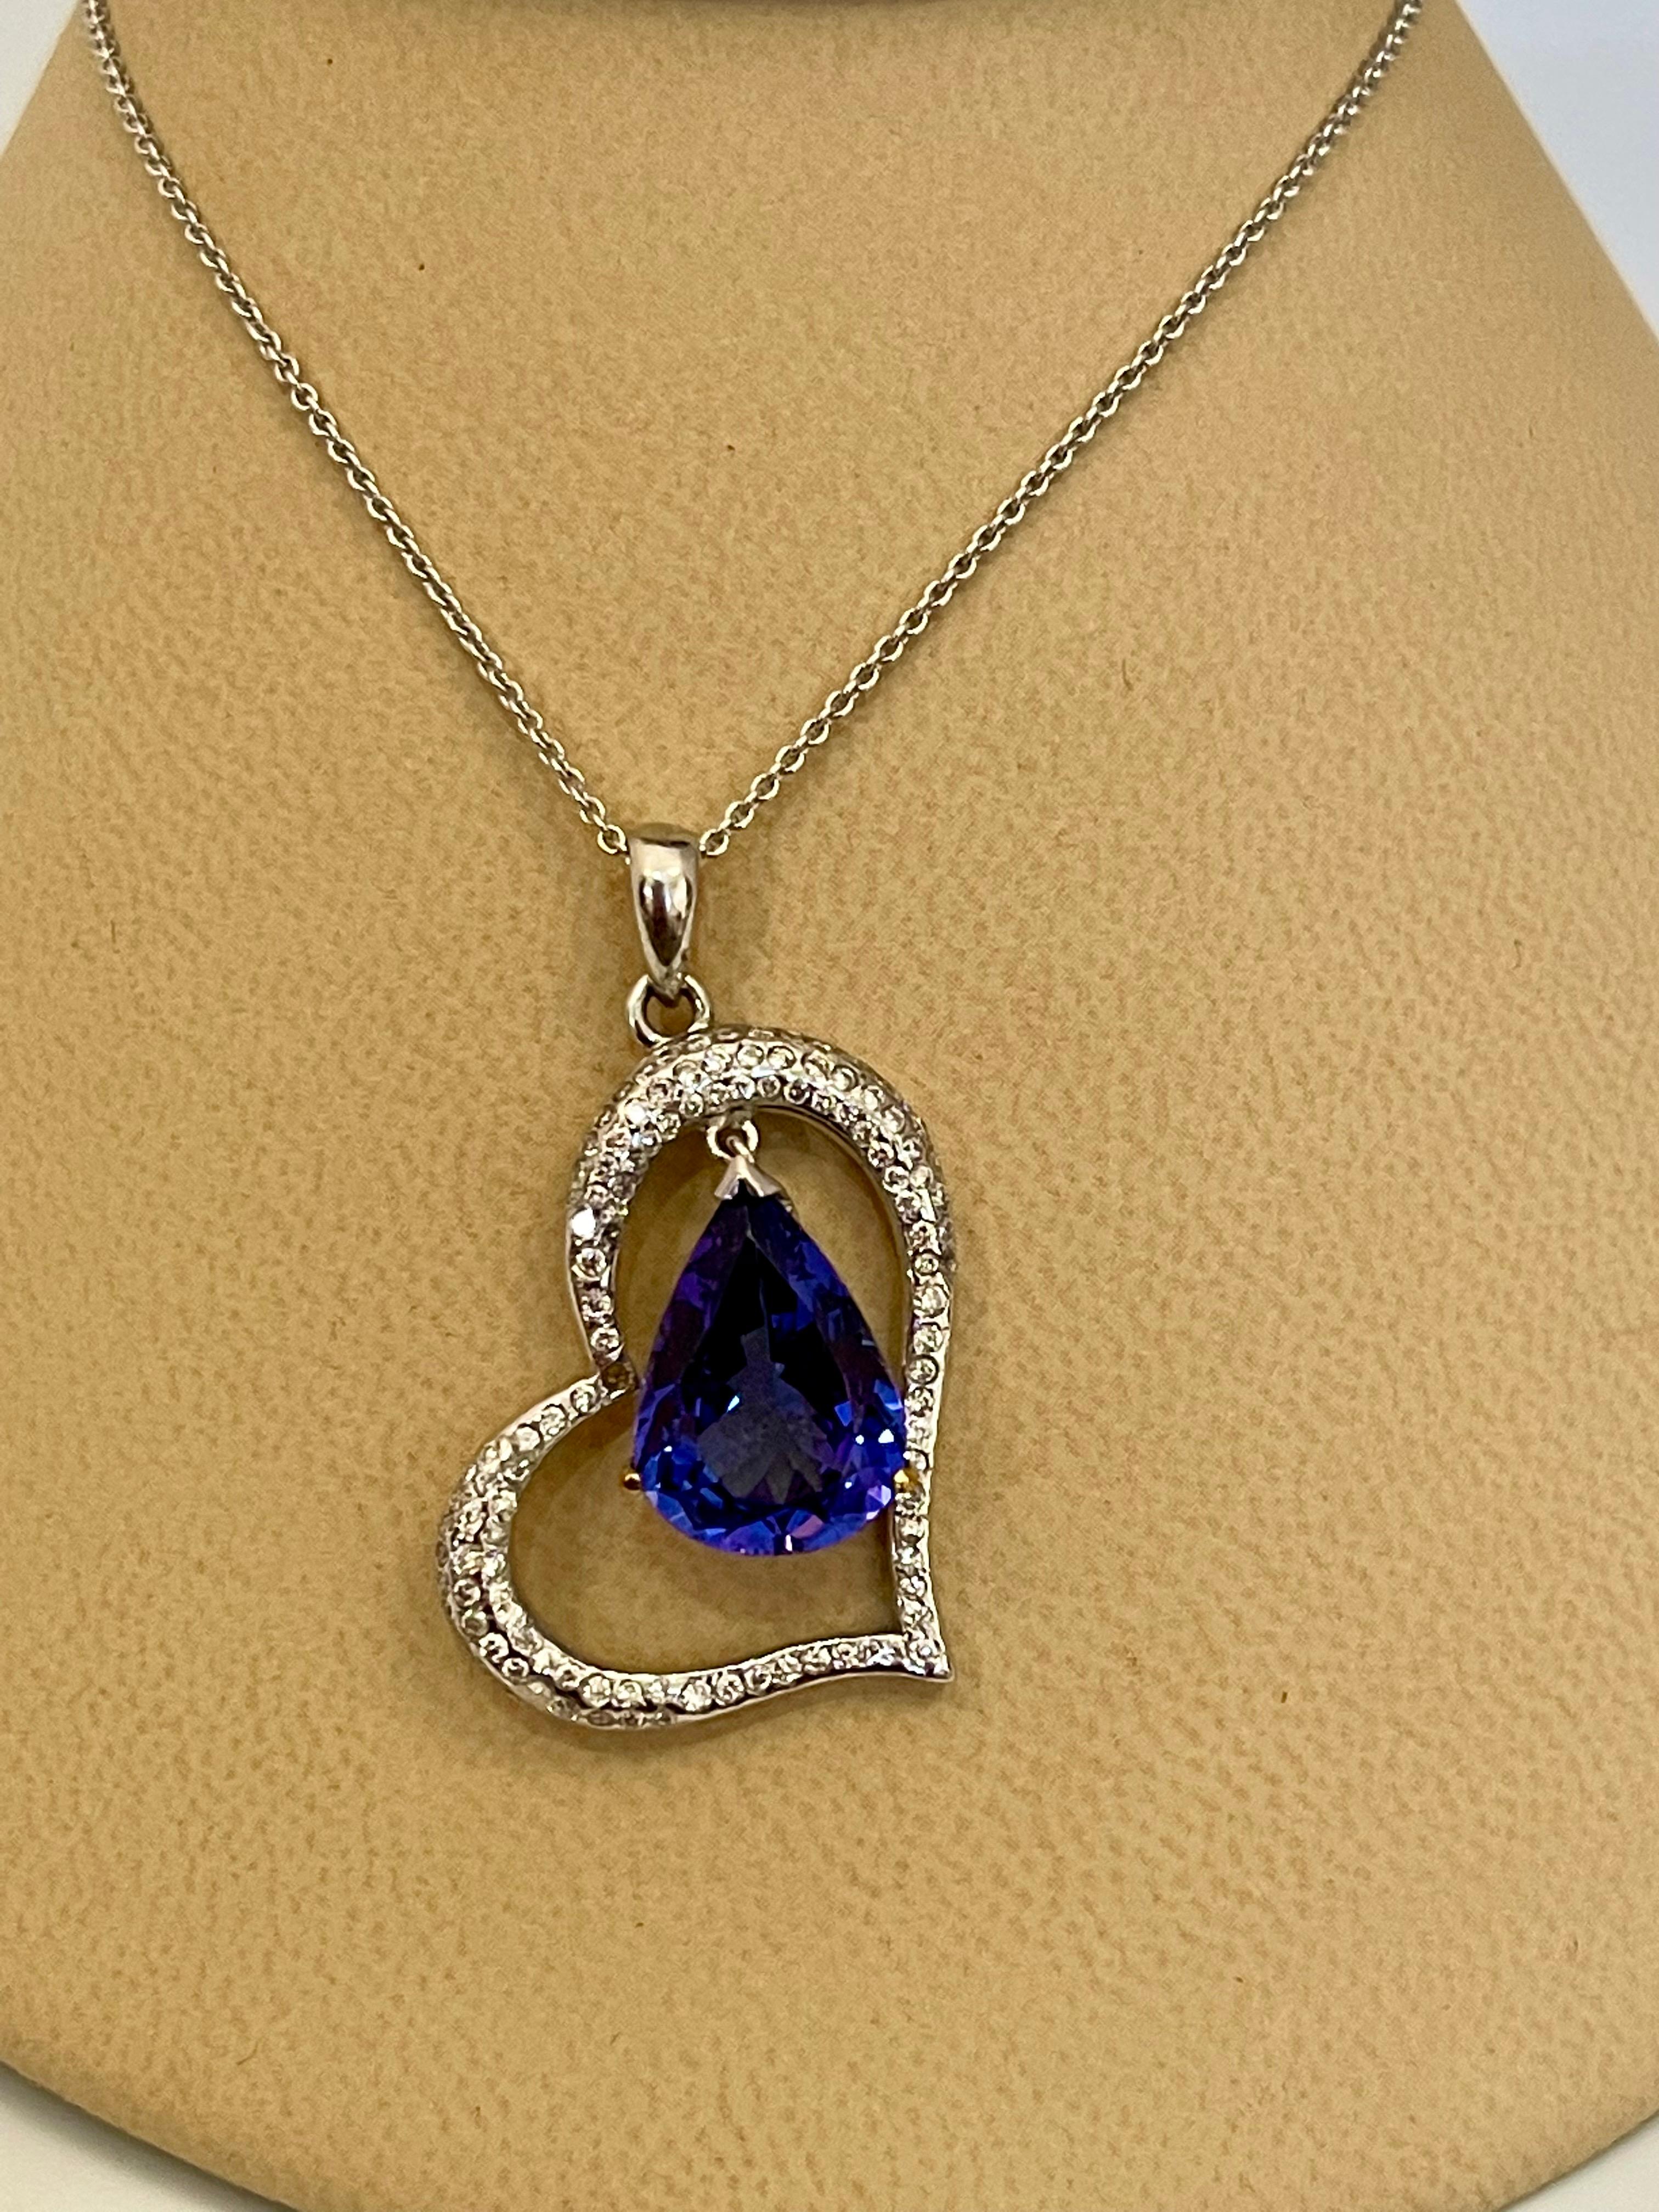 
Fix the ct weight and make the listing, only pictures are loaded
3 carats of fine  quality of  Tanzanite pendant surrounded by brilliant round  cut Diamonds all mounted in 18 karat White  gold. Weight of the necklace is 9 Grams . 
Tanzanite Weight 